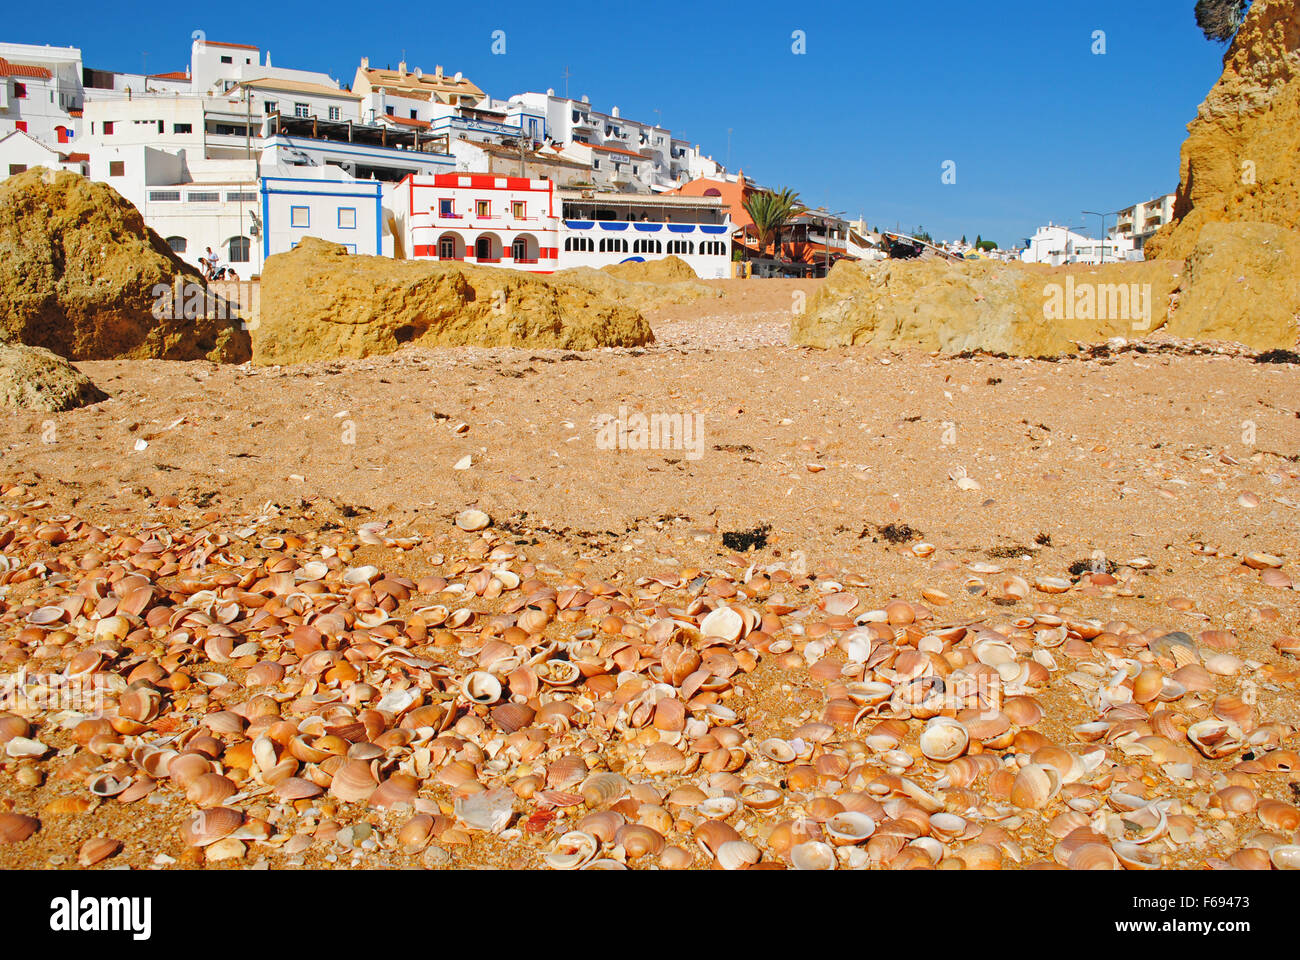 Seashells on a sandy beach with a village in the background. Stock Photo